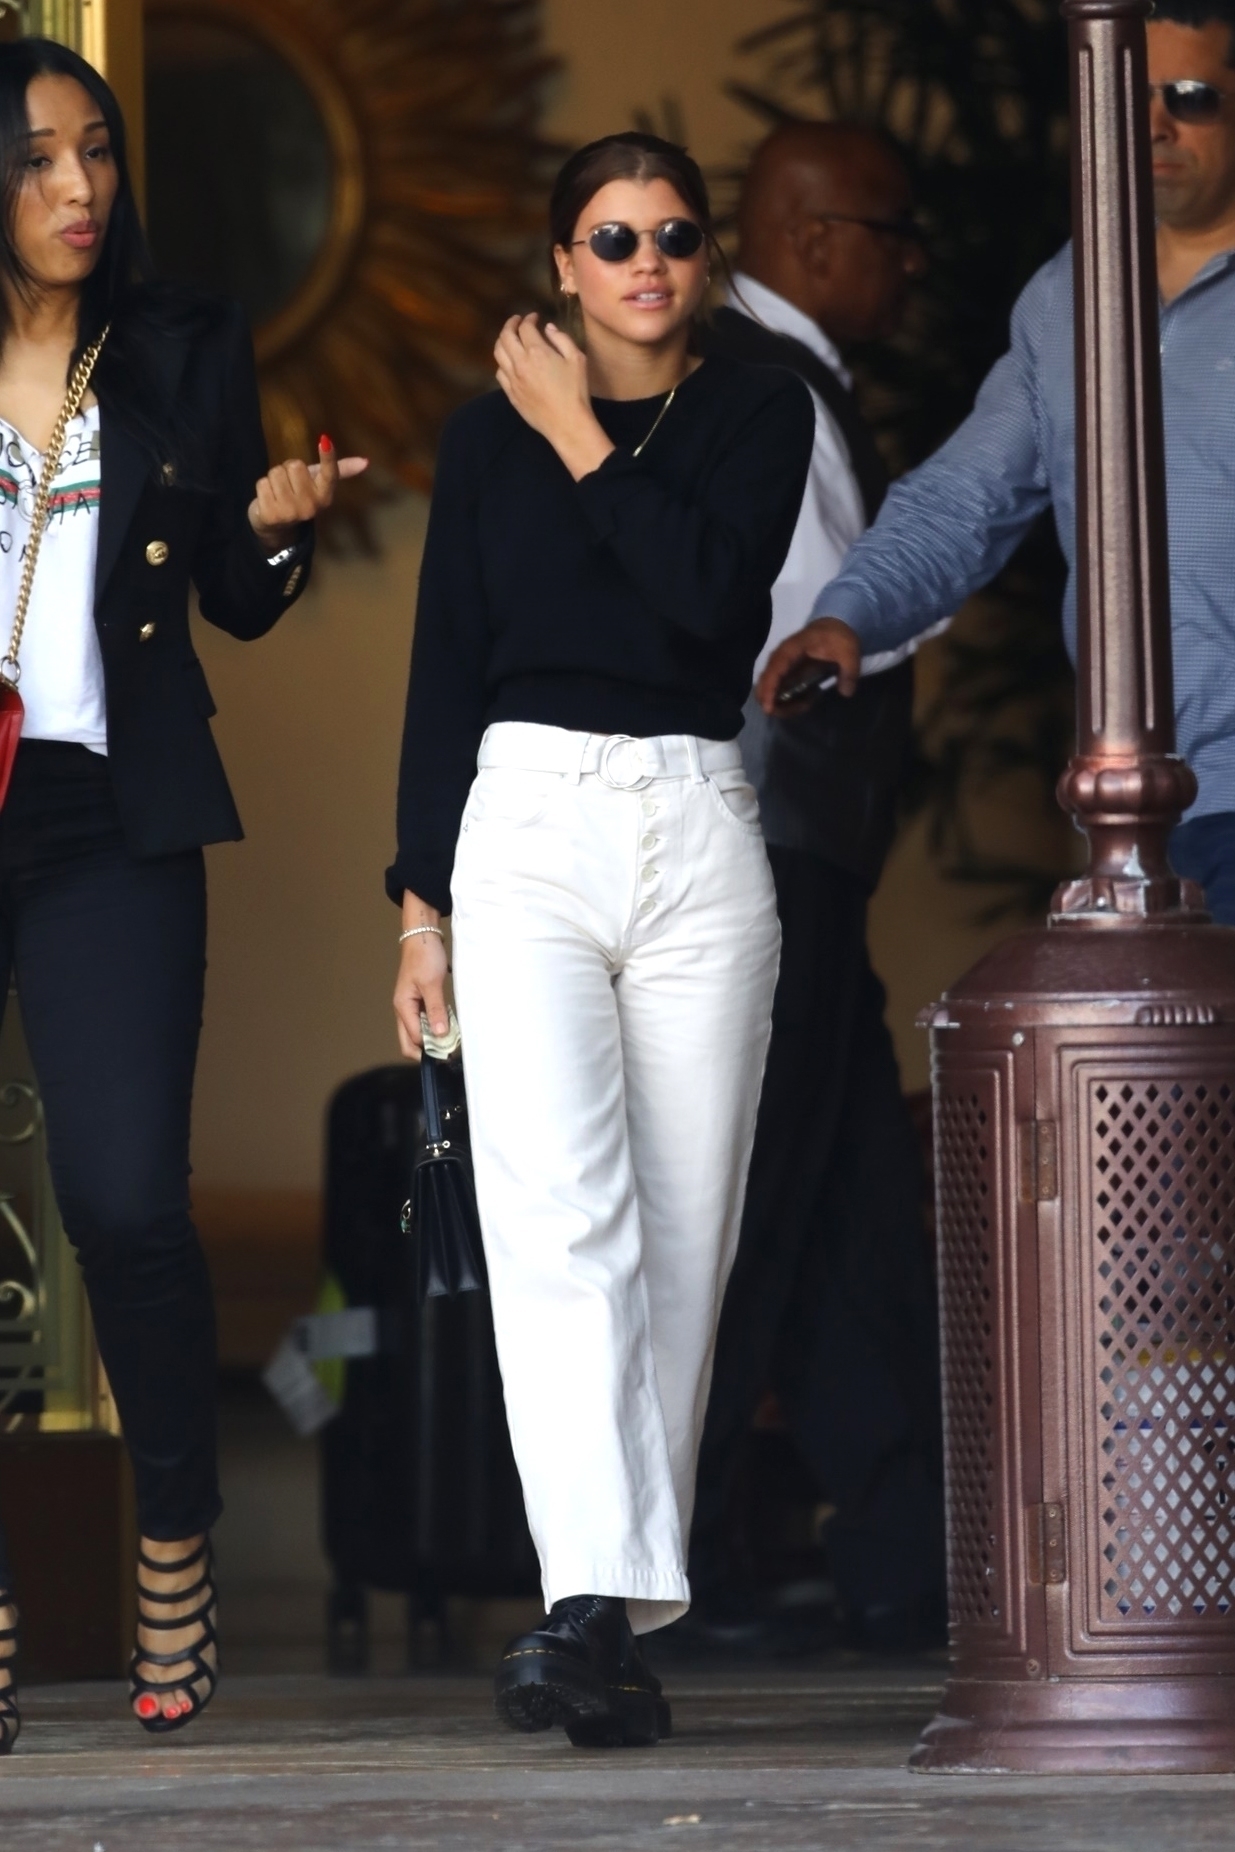 sofia-richie-leaving-the-montage-hotel-in-beverly-hills-4218-12.jpg